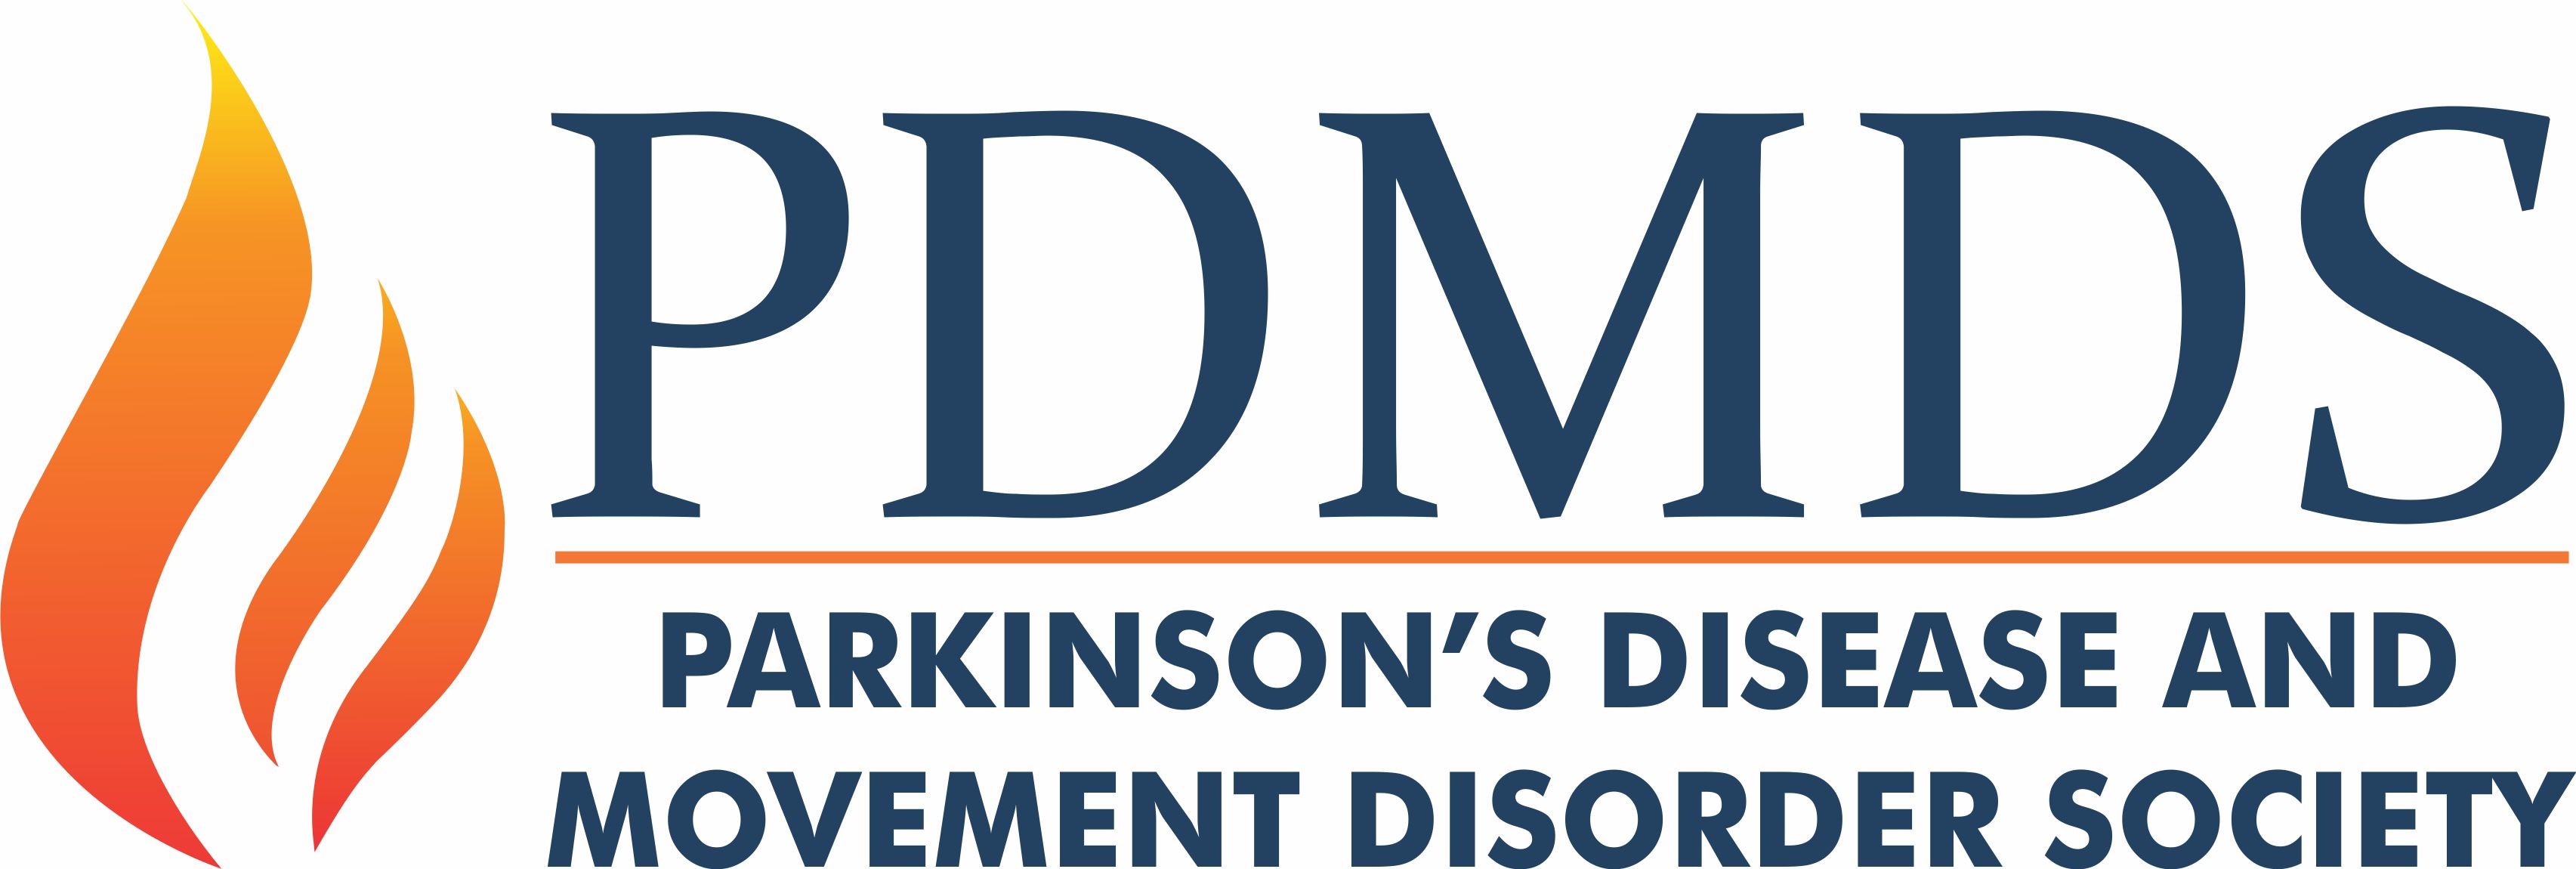 PDMDS - Parkinson's Disease and Movement Disorder Society in India